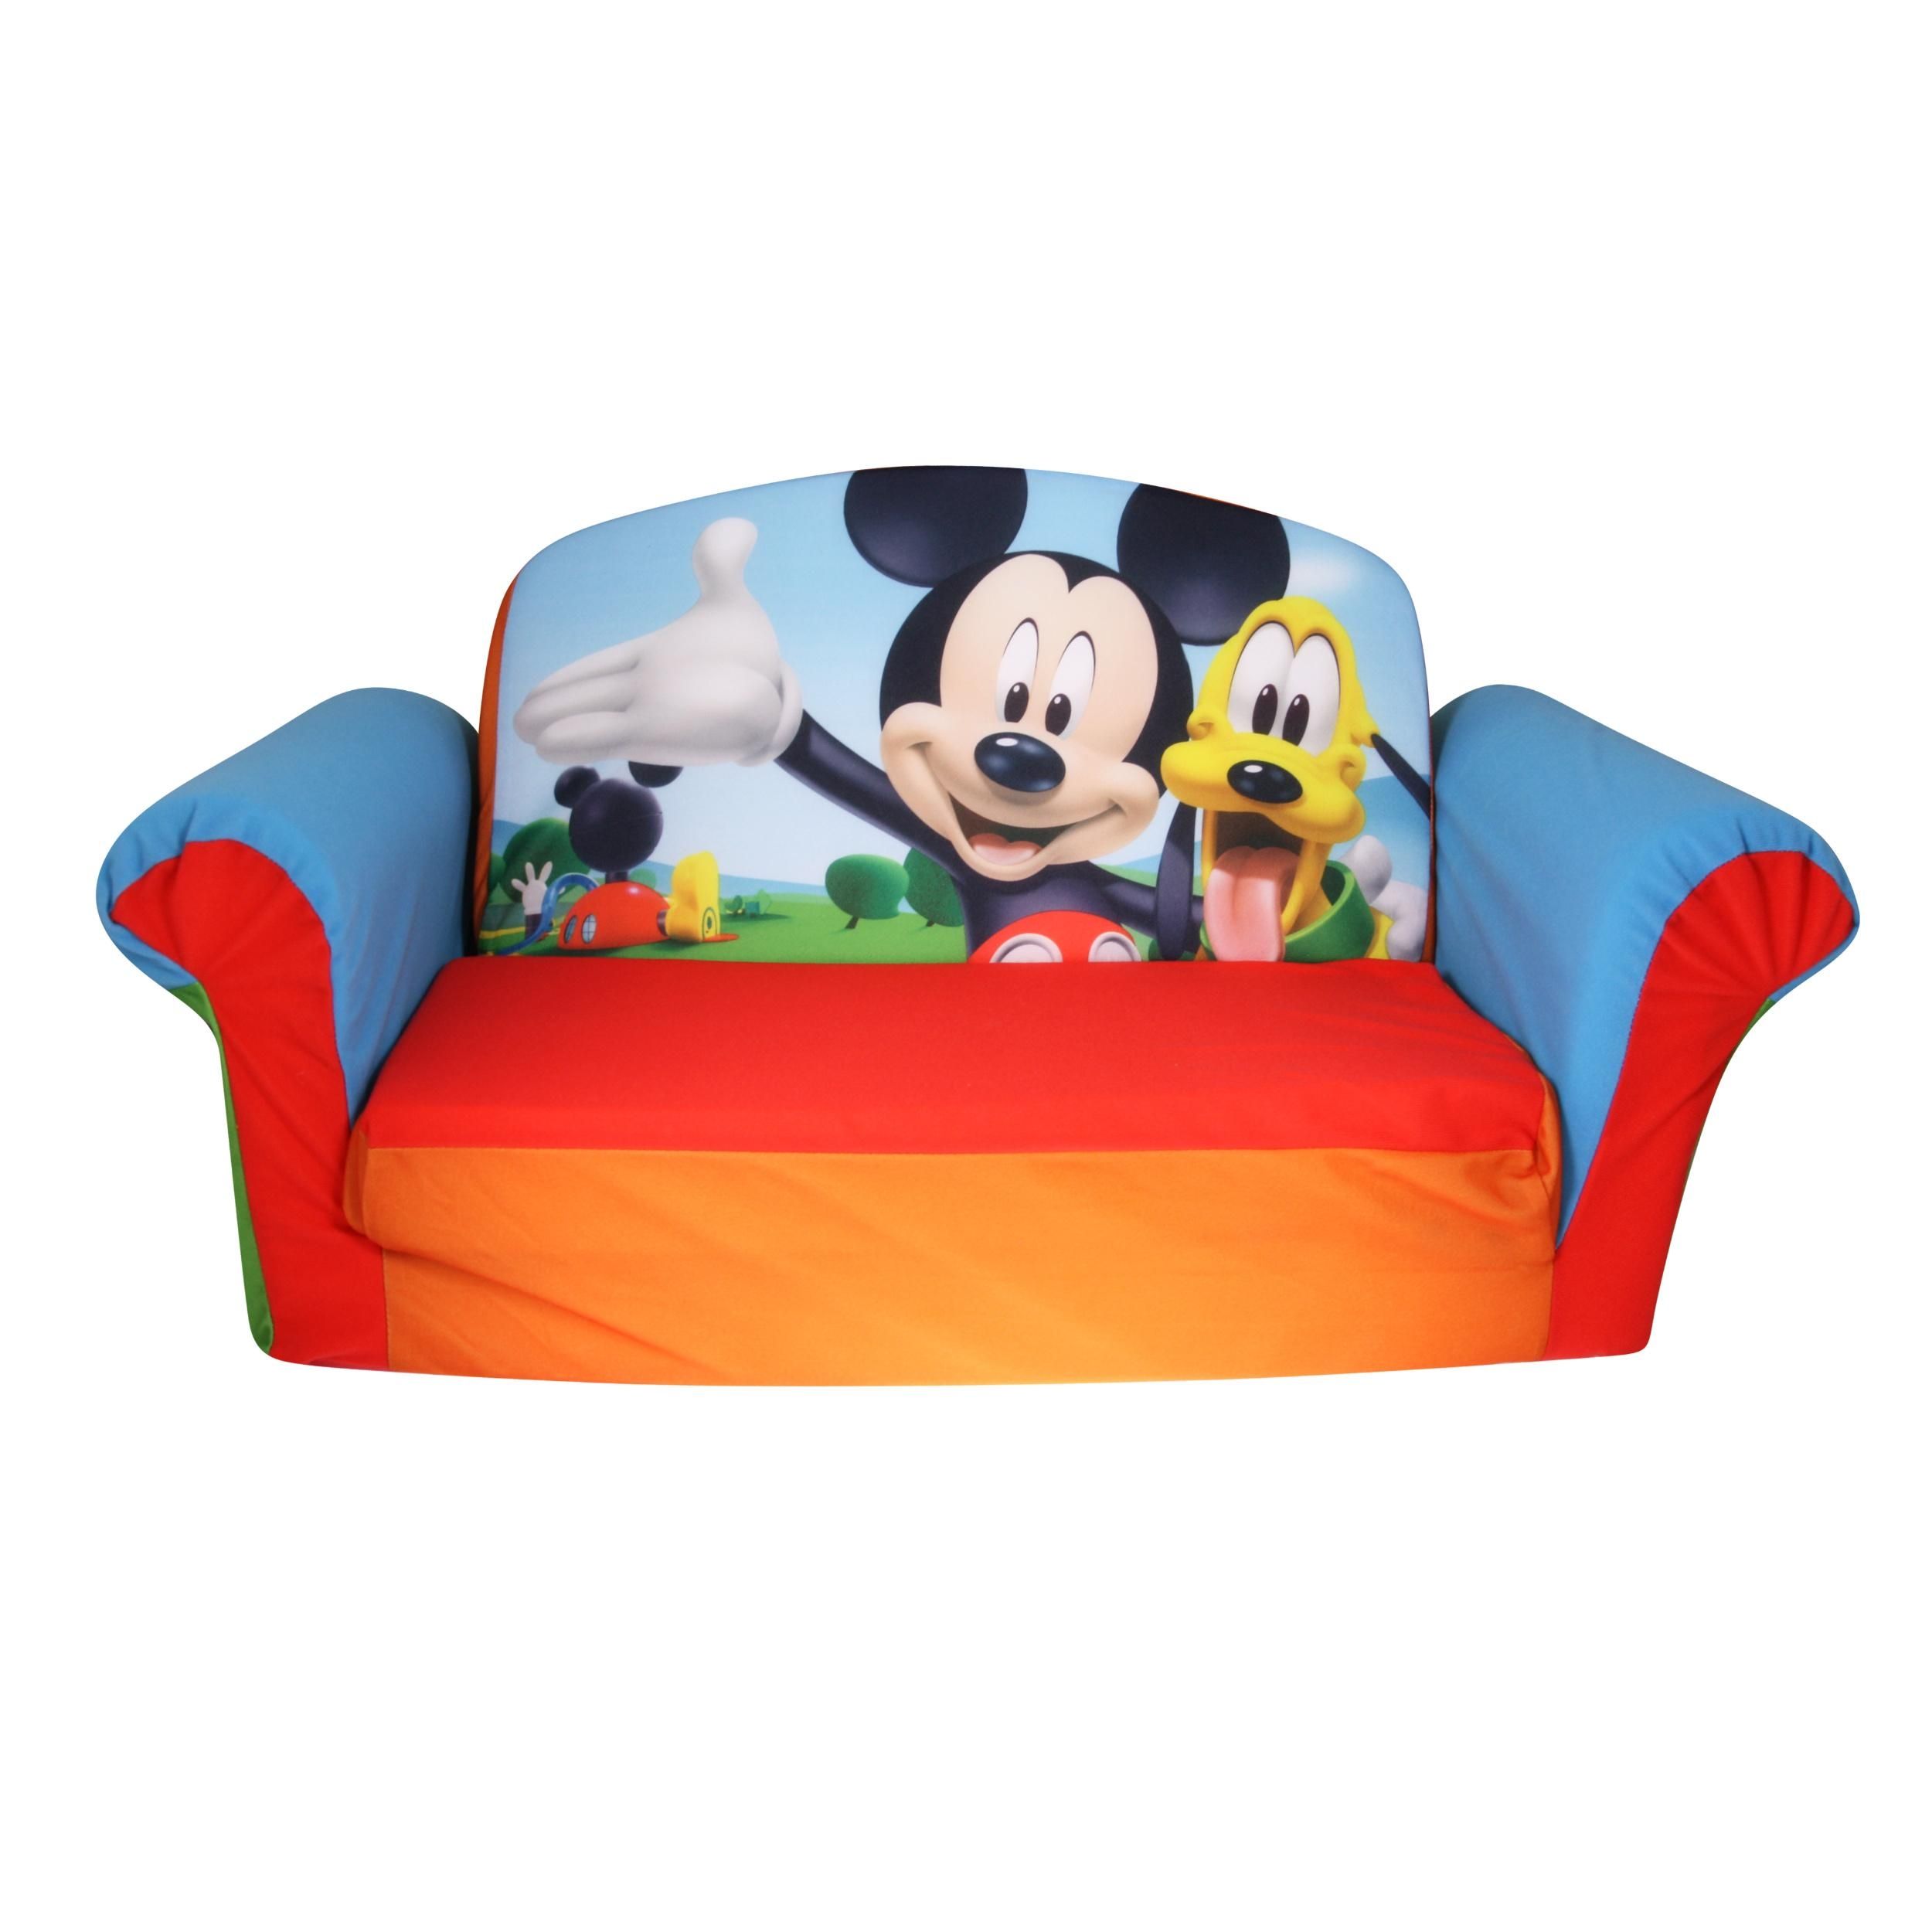 Marshmallow Furniture, Children's 2 In 1 Flip Open Foam Sofa With Regard To Mickey Mouse Clubhouse Couches (View 1 of 20)